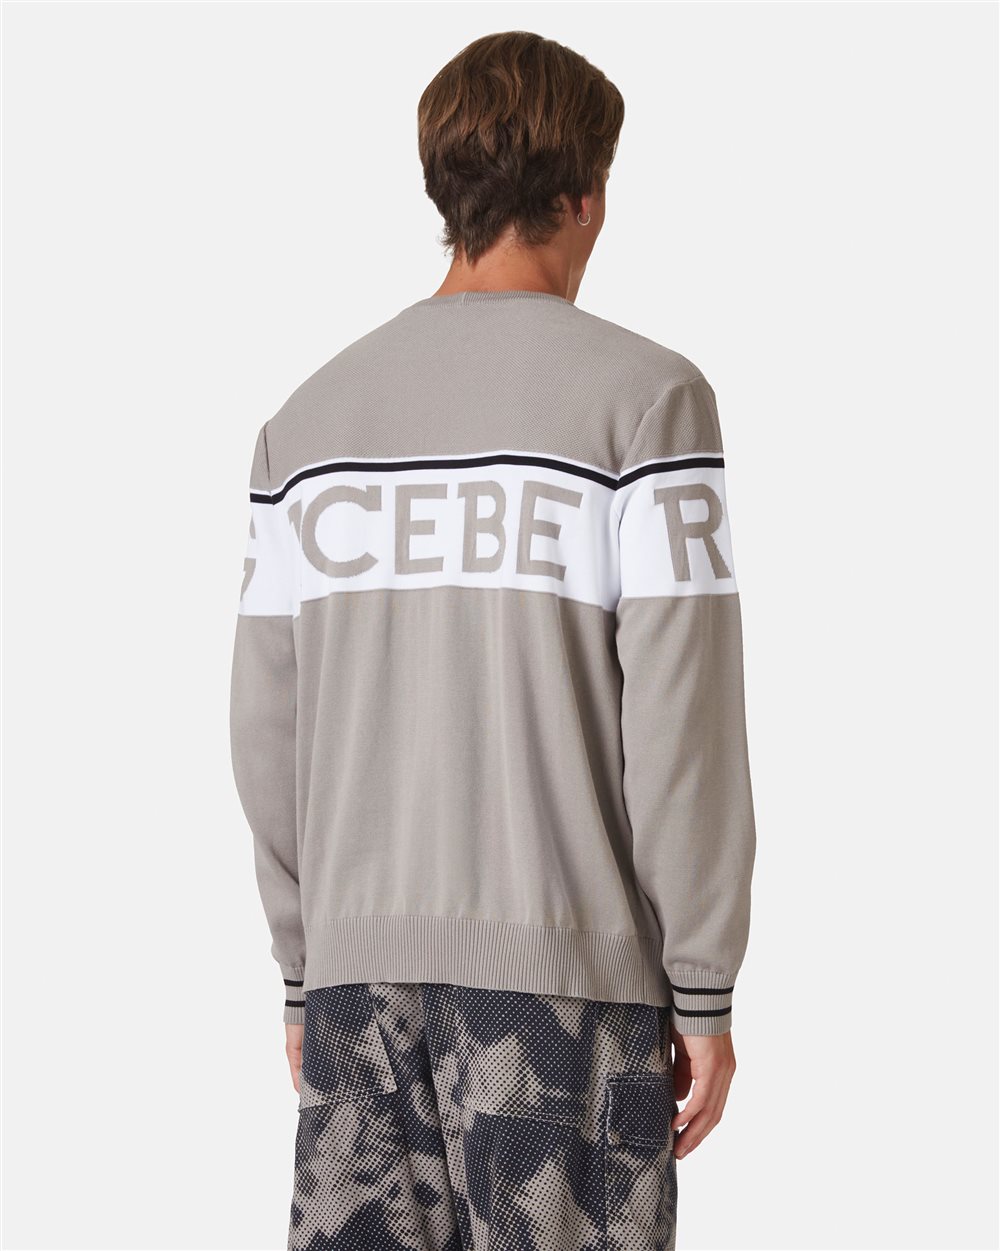 Sweater with logo - Iceberg - Official Website